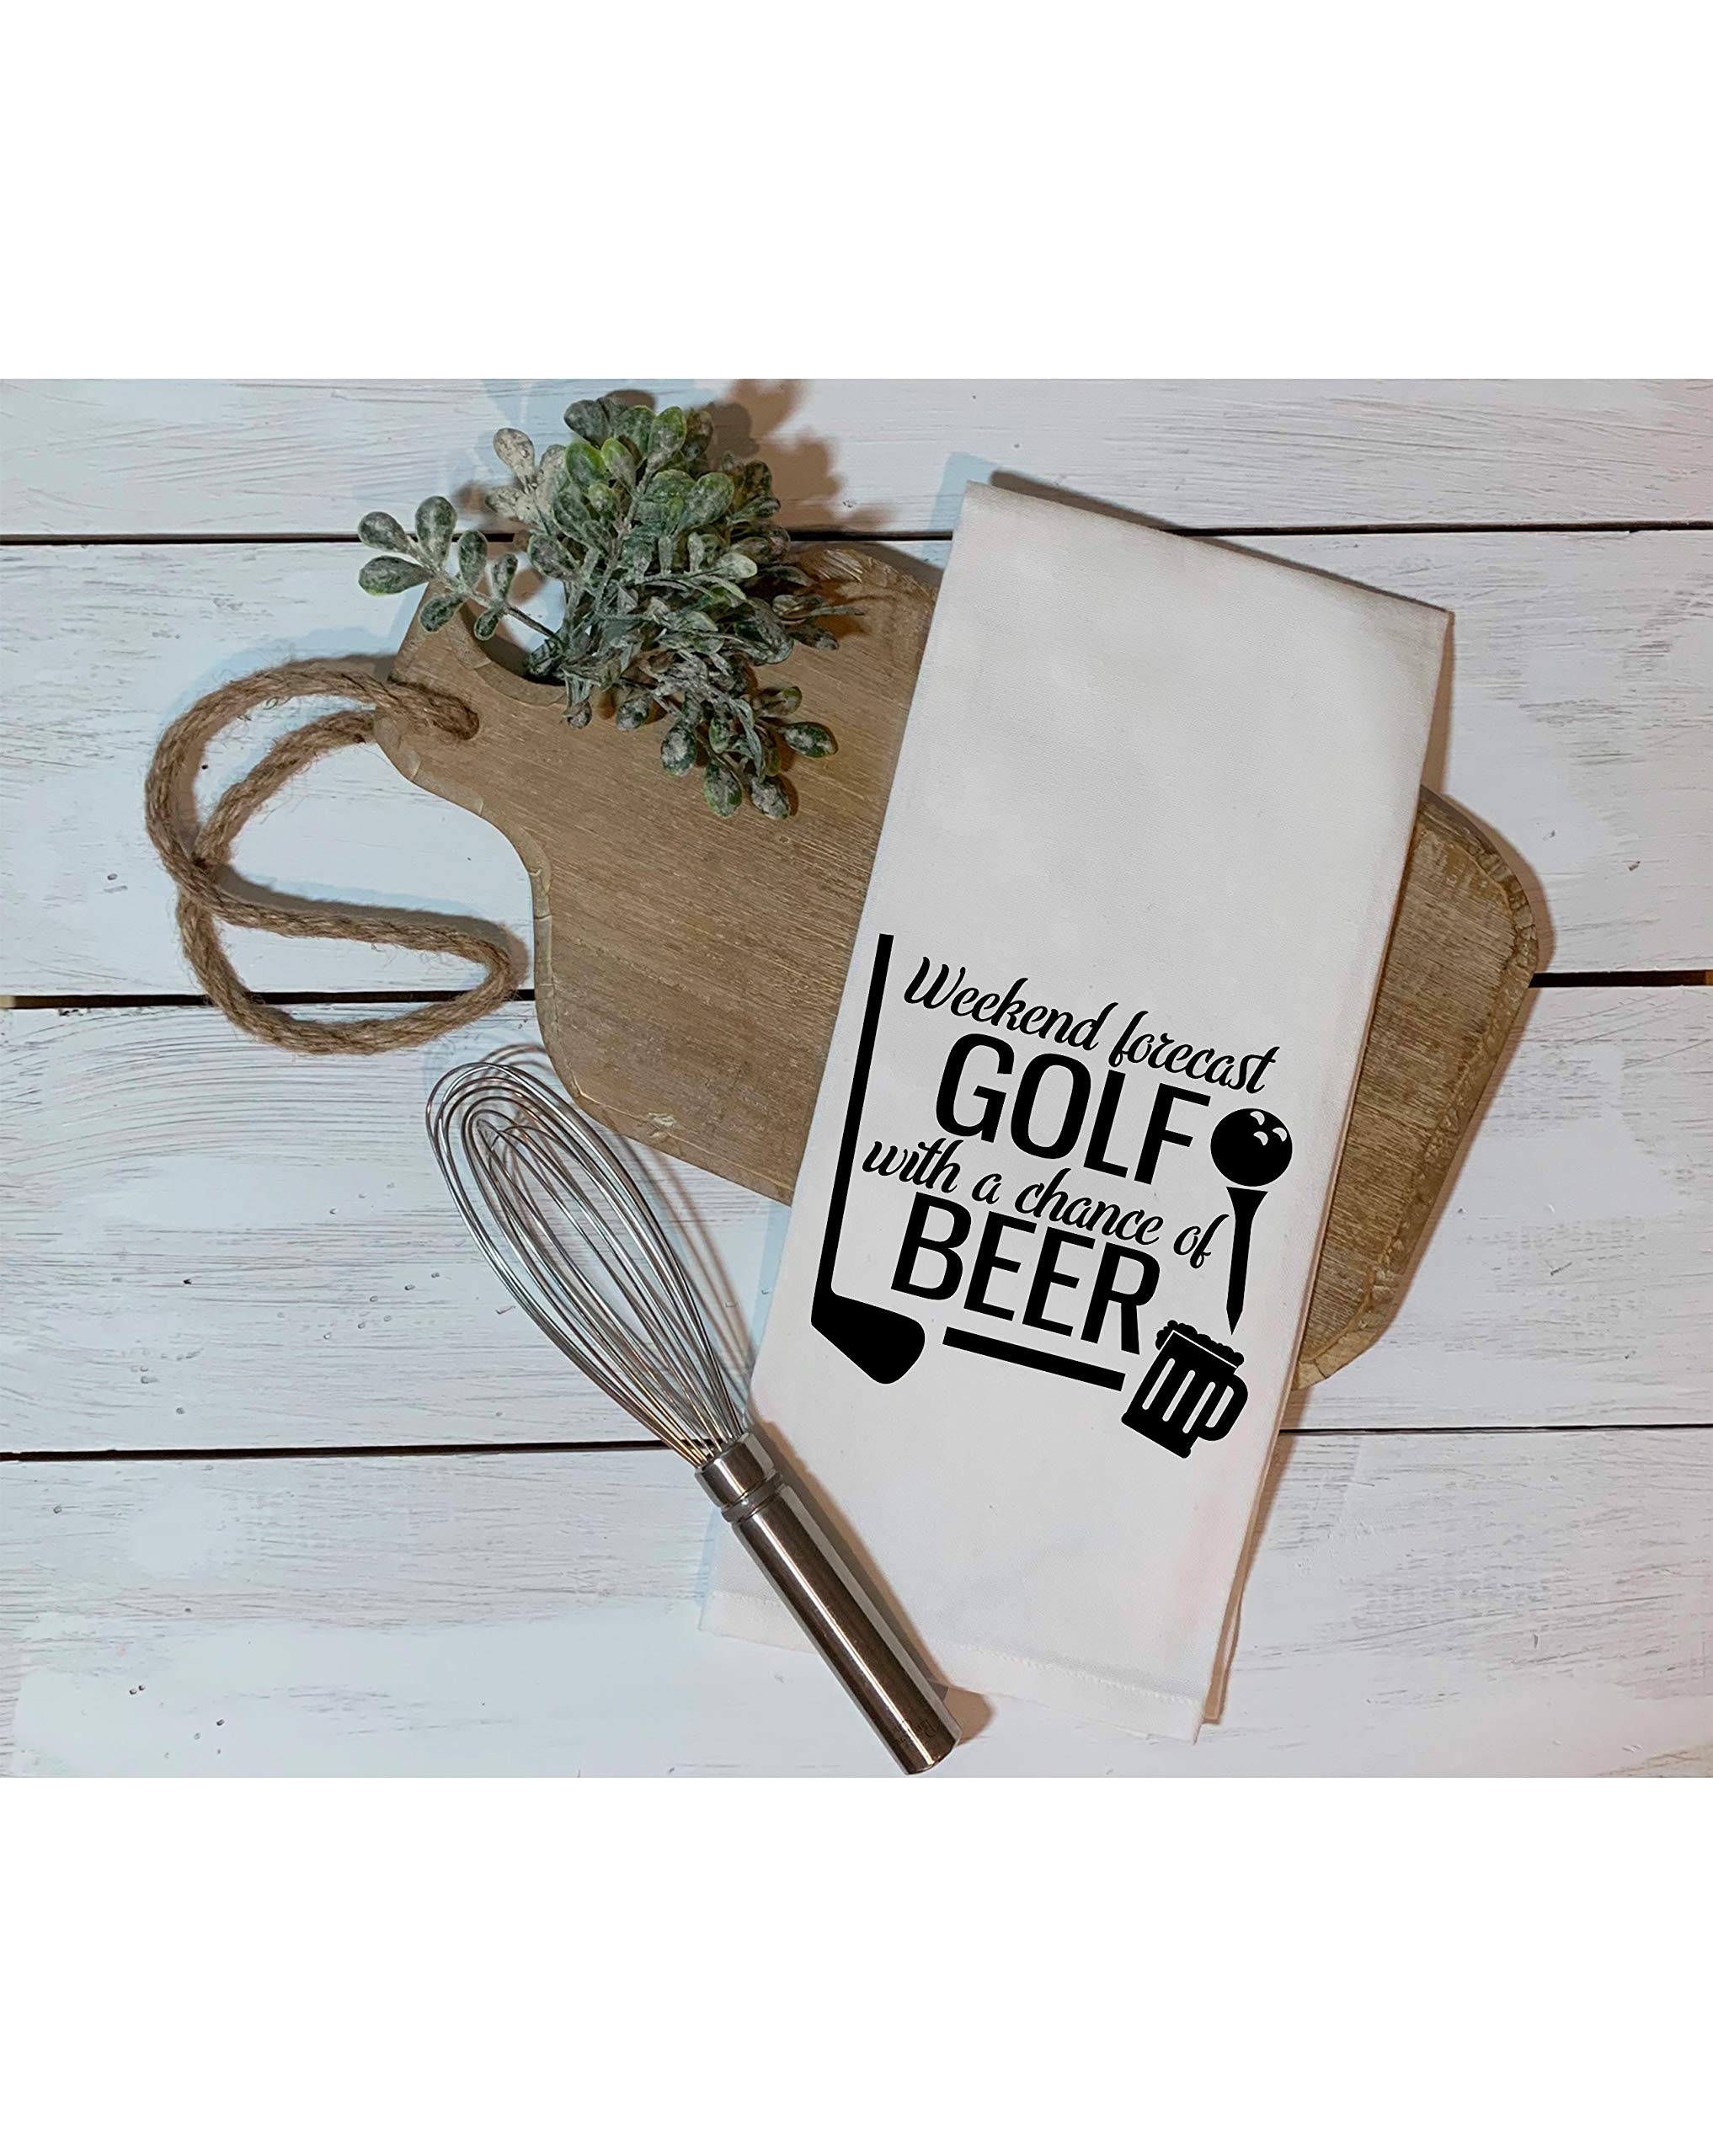 Weekend for cast Golf with a Chance of Beer - Dish Towel Kitchen Tea Towel Funny Saying Humorous Flour Sack Towels Great Housewarming Gift 28 inch by 28 inch, 100% Cotton, Multi-Purpose Towel